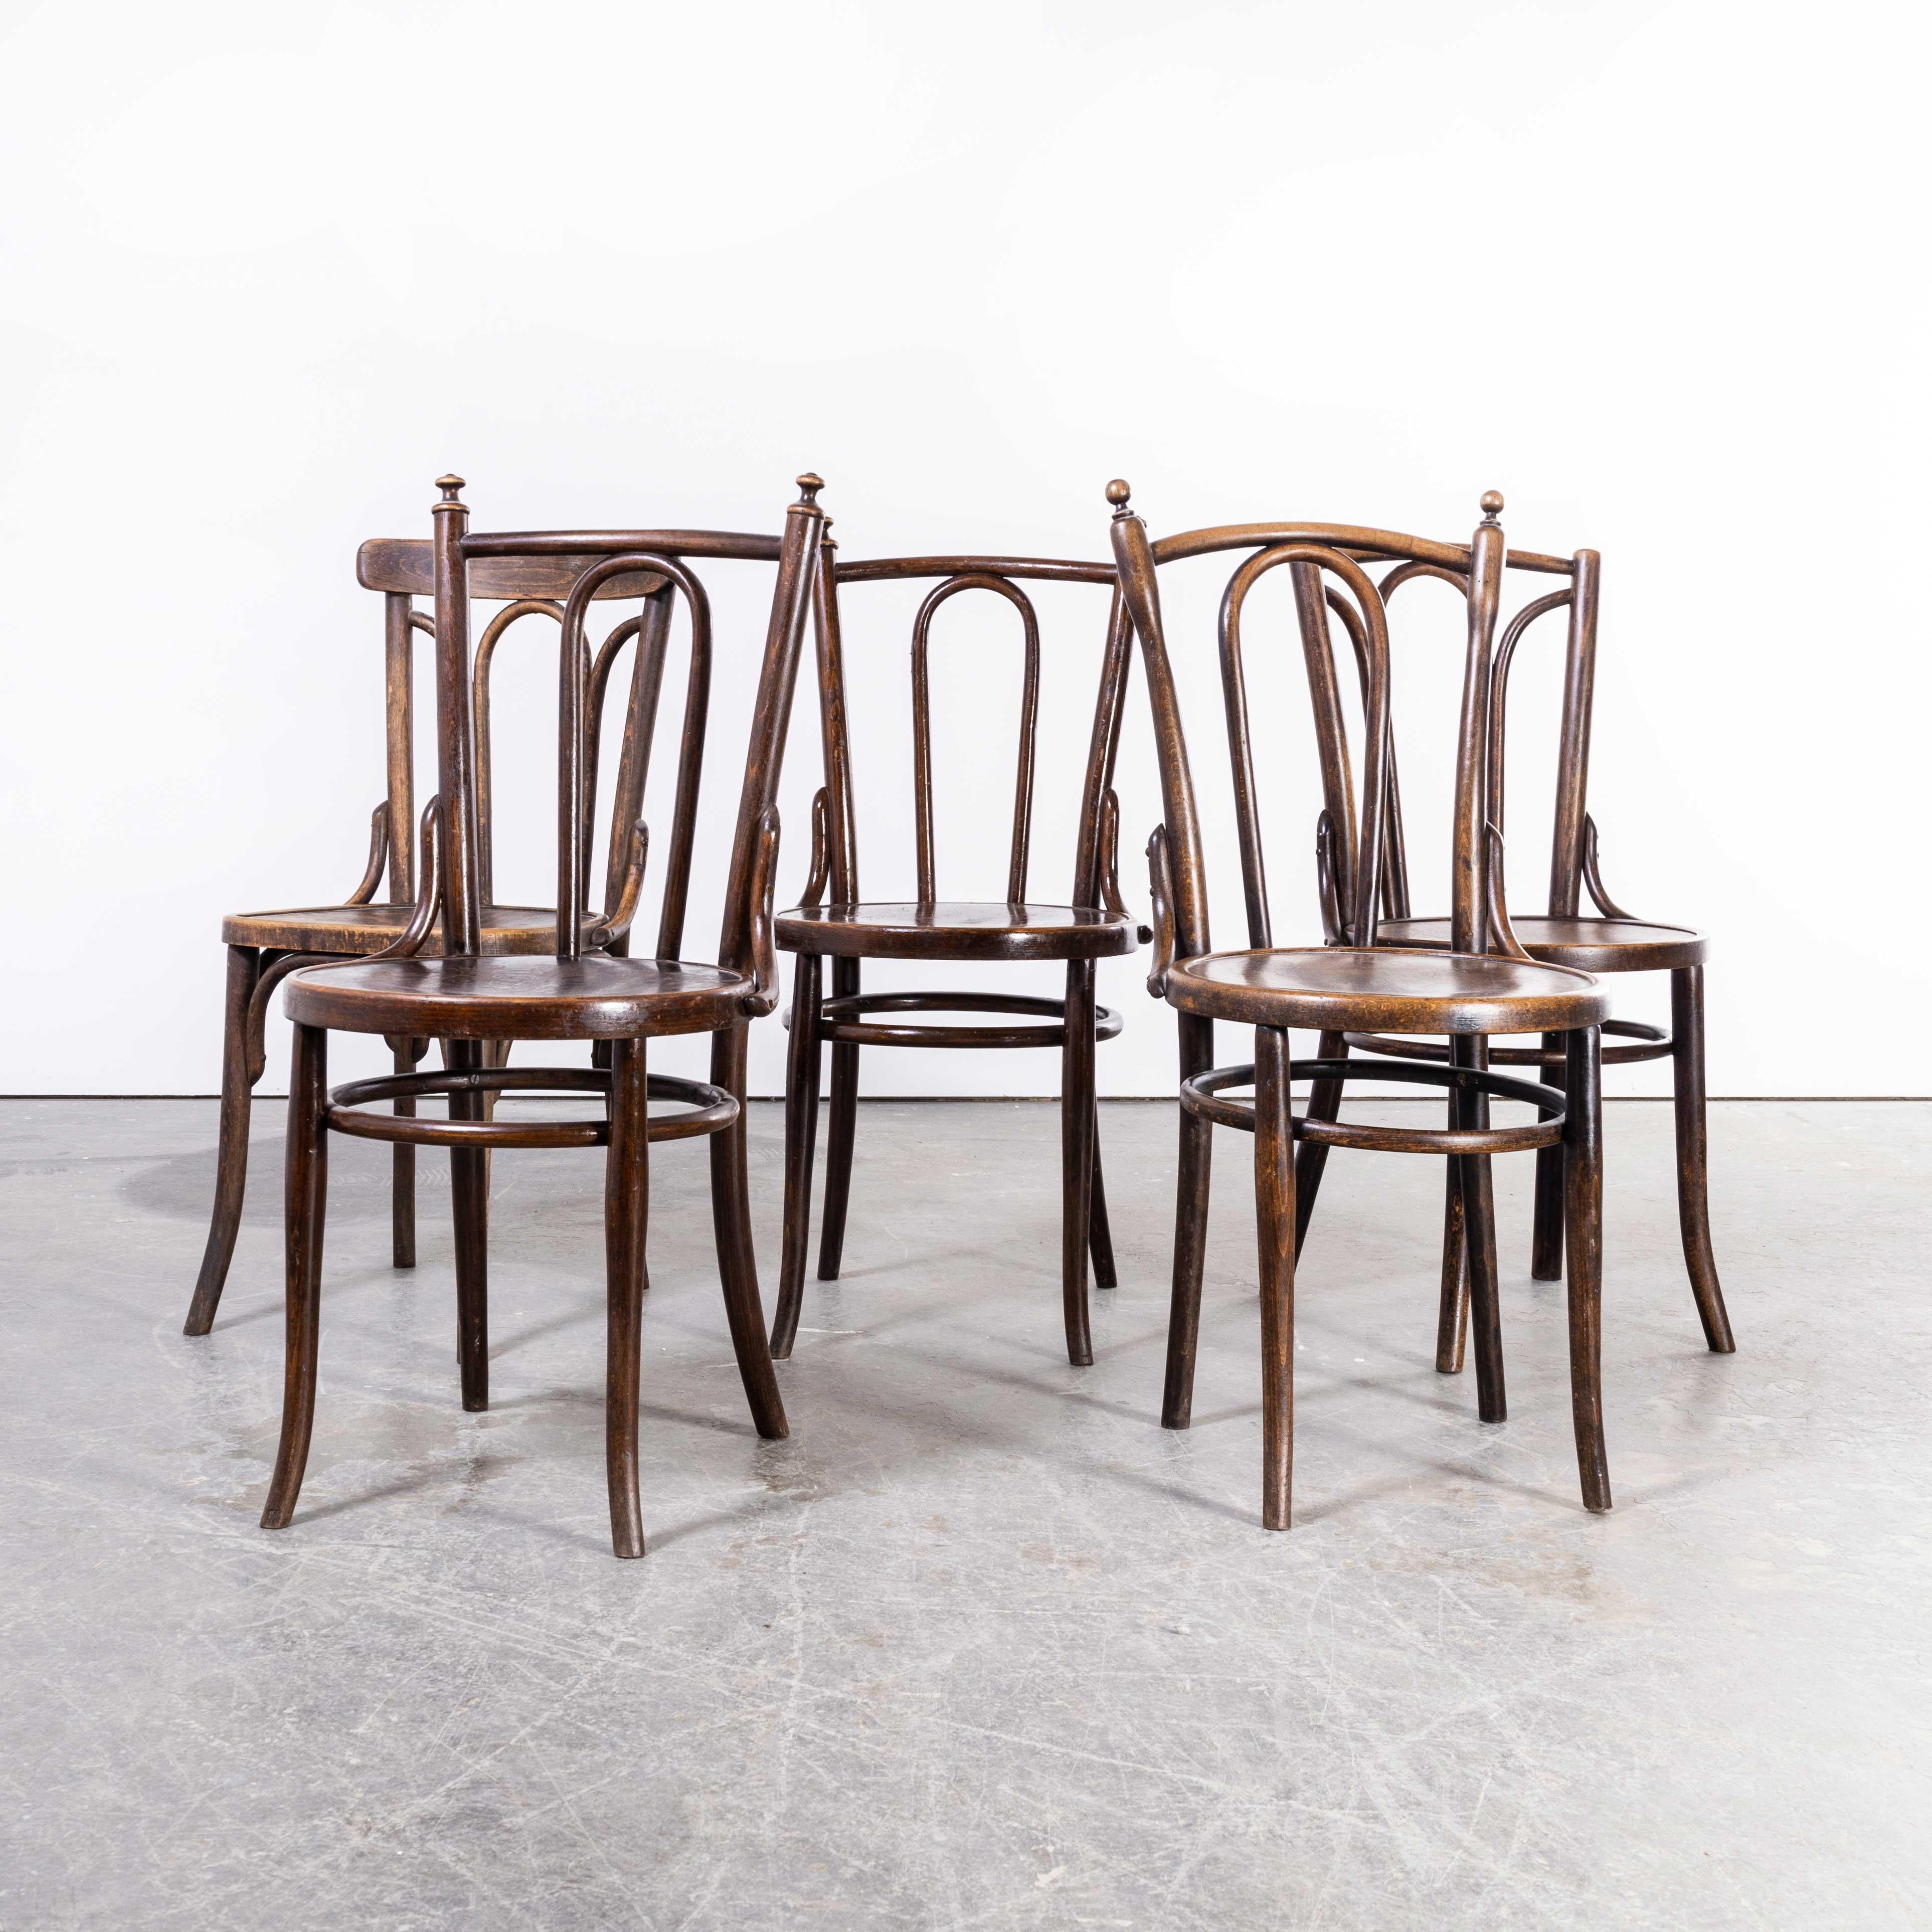 1940’s Bentwood Debrecen dining chairs – harlequin set of five
1940’s Bentwood Debrecen dining chairs – harlequin set of five. It is hard to be precise about the origin of these chairs as little history is known, but what we do know is at the